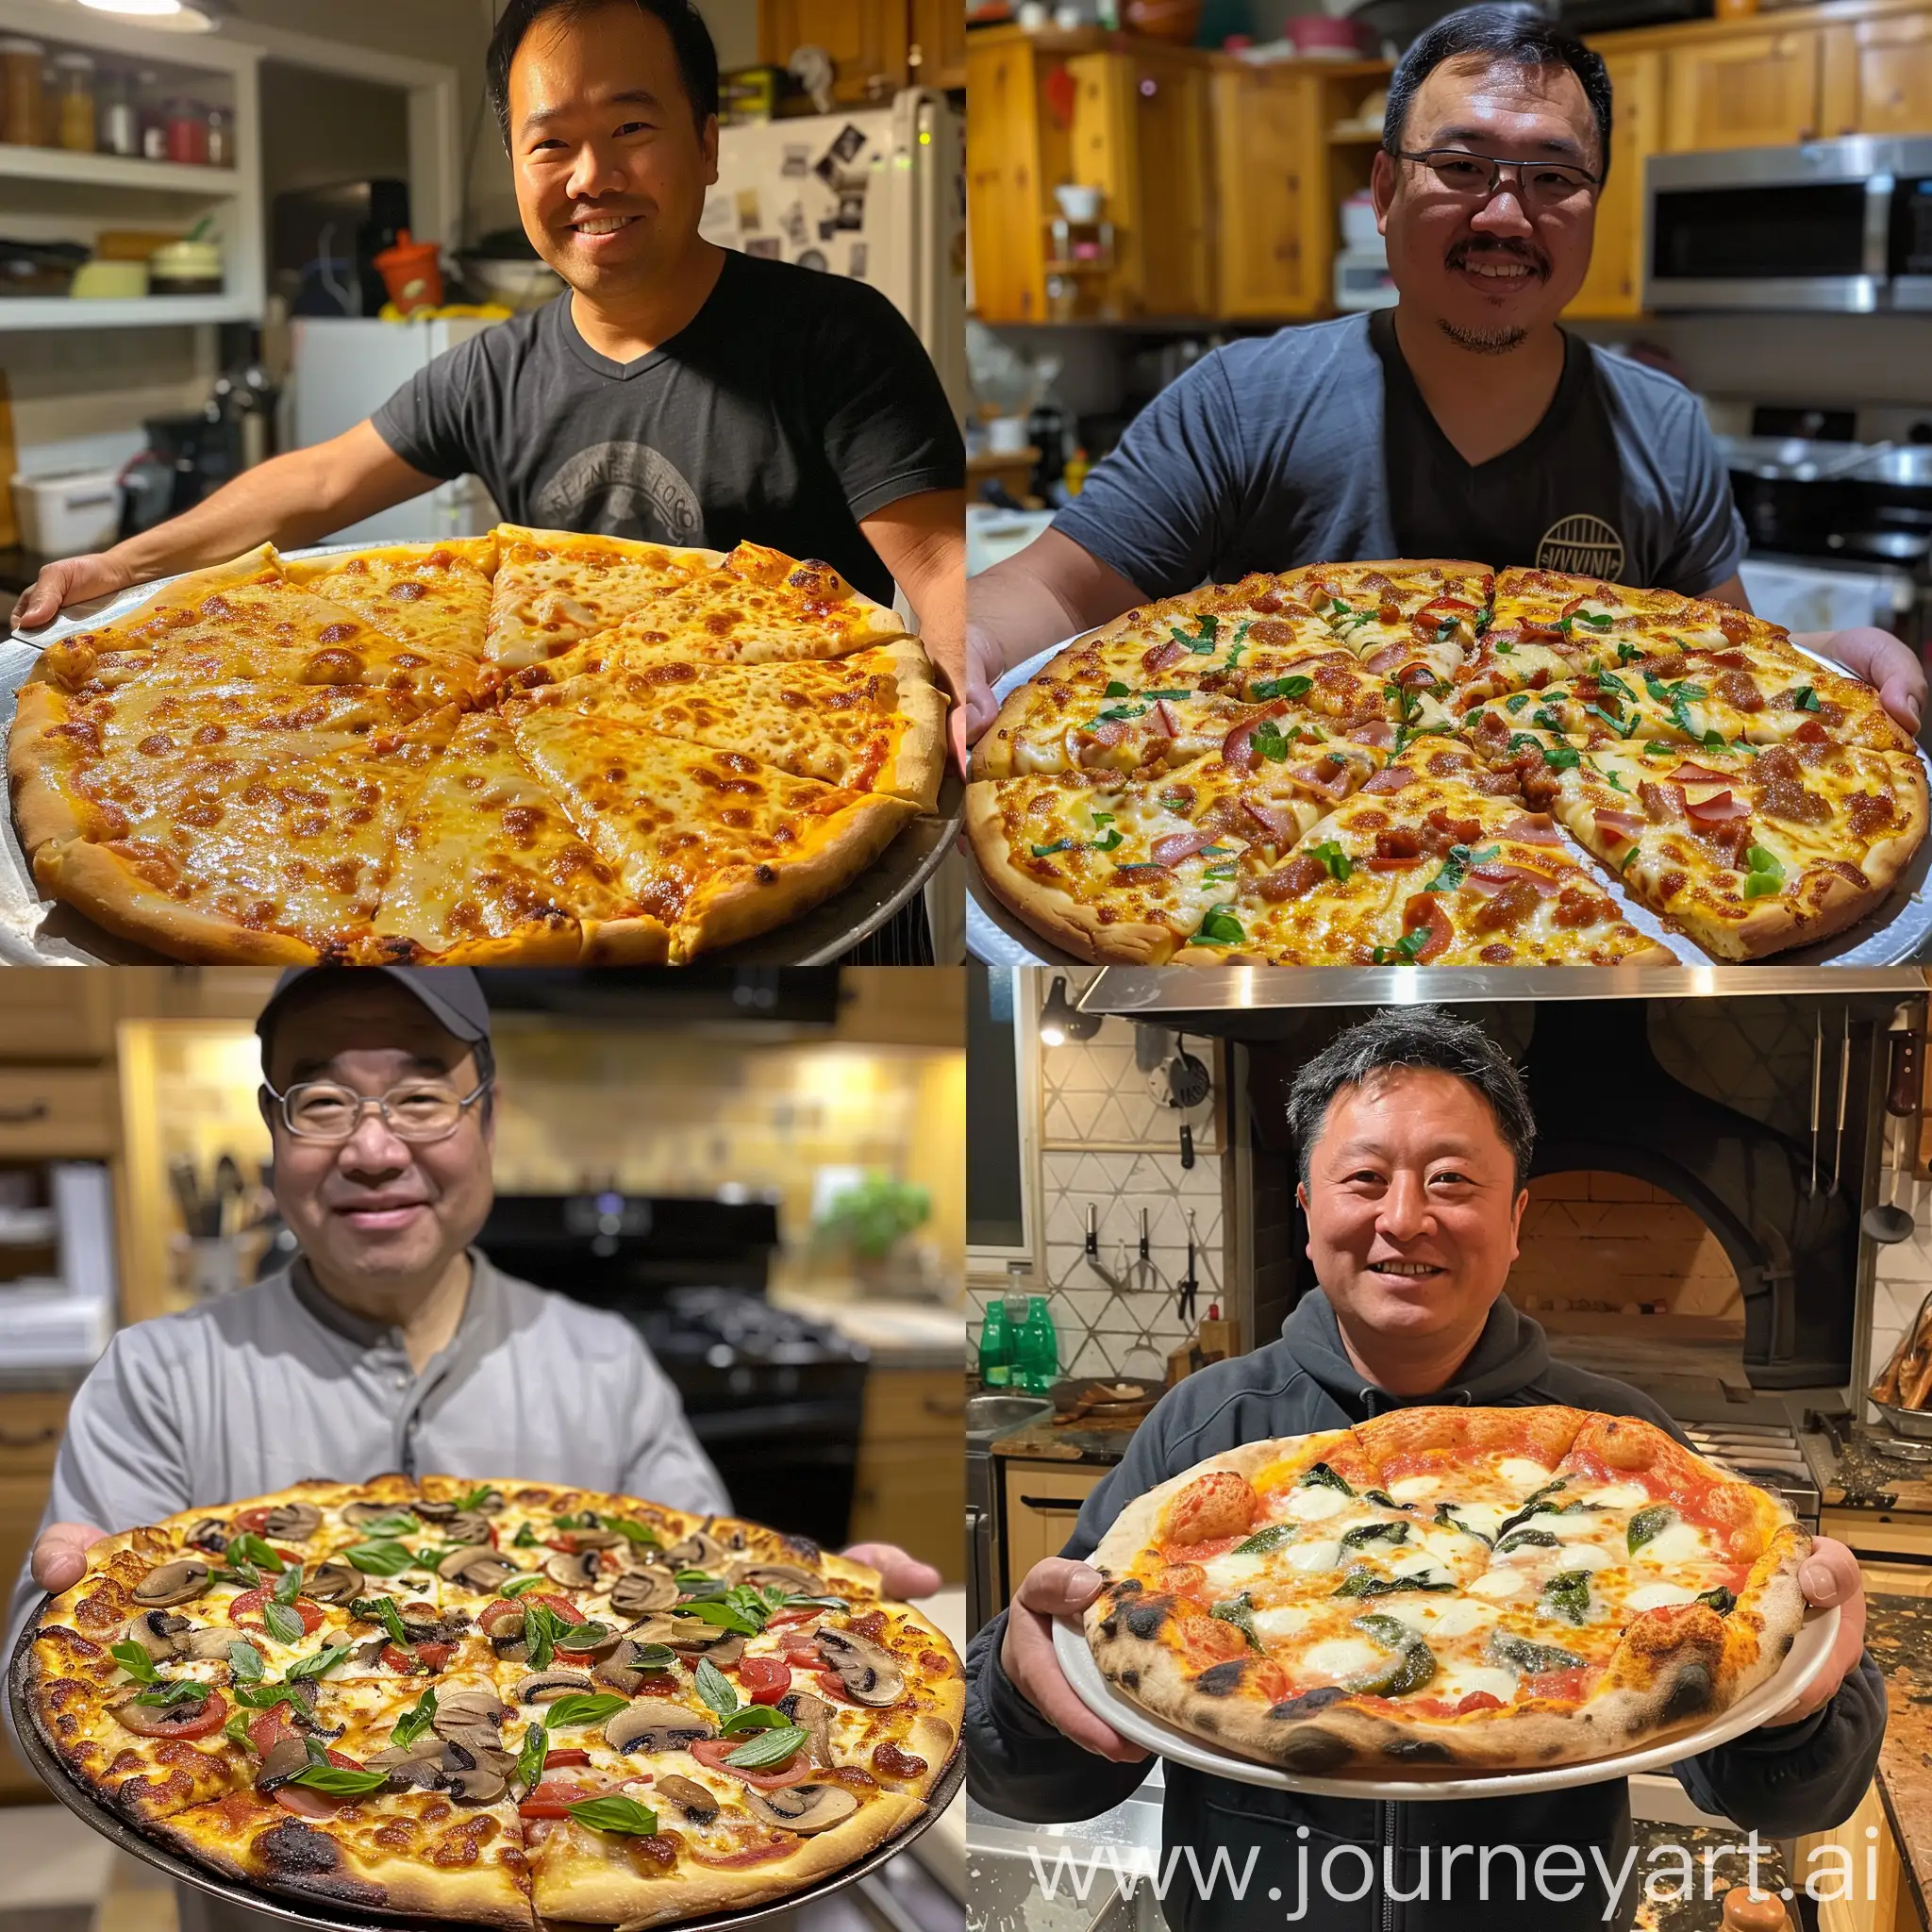 Mr. Lee is great at cooking. He wrote the book on making pizza.